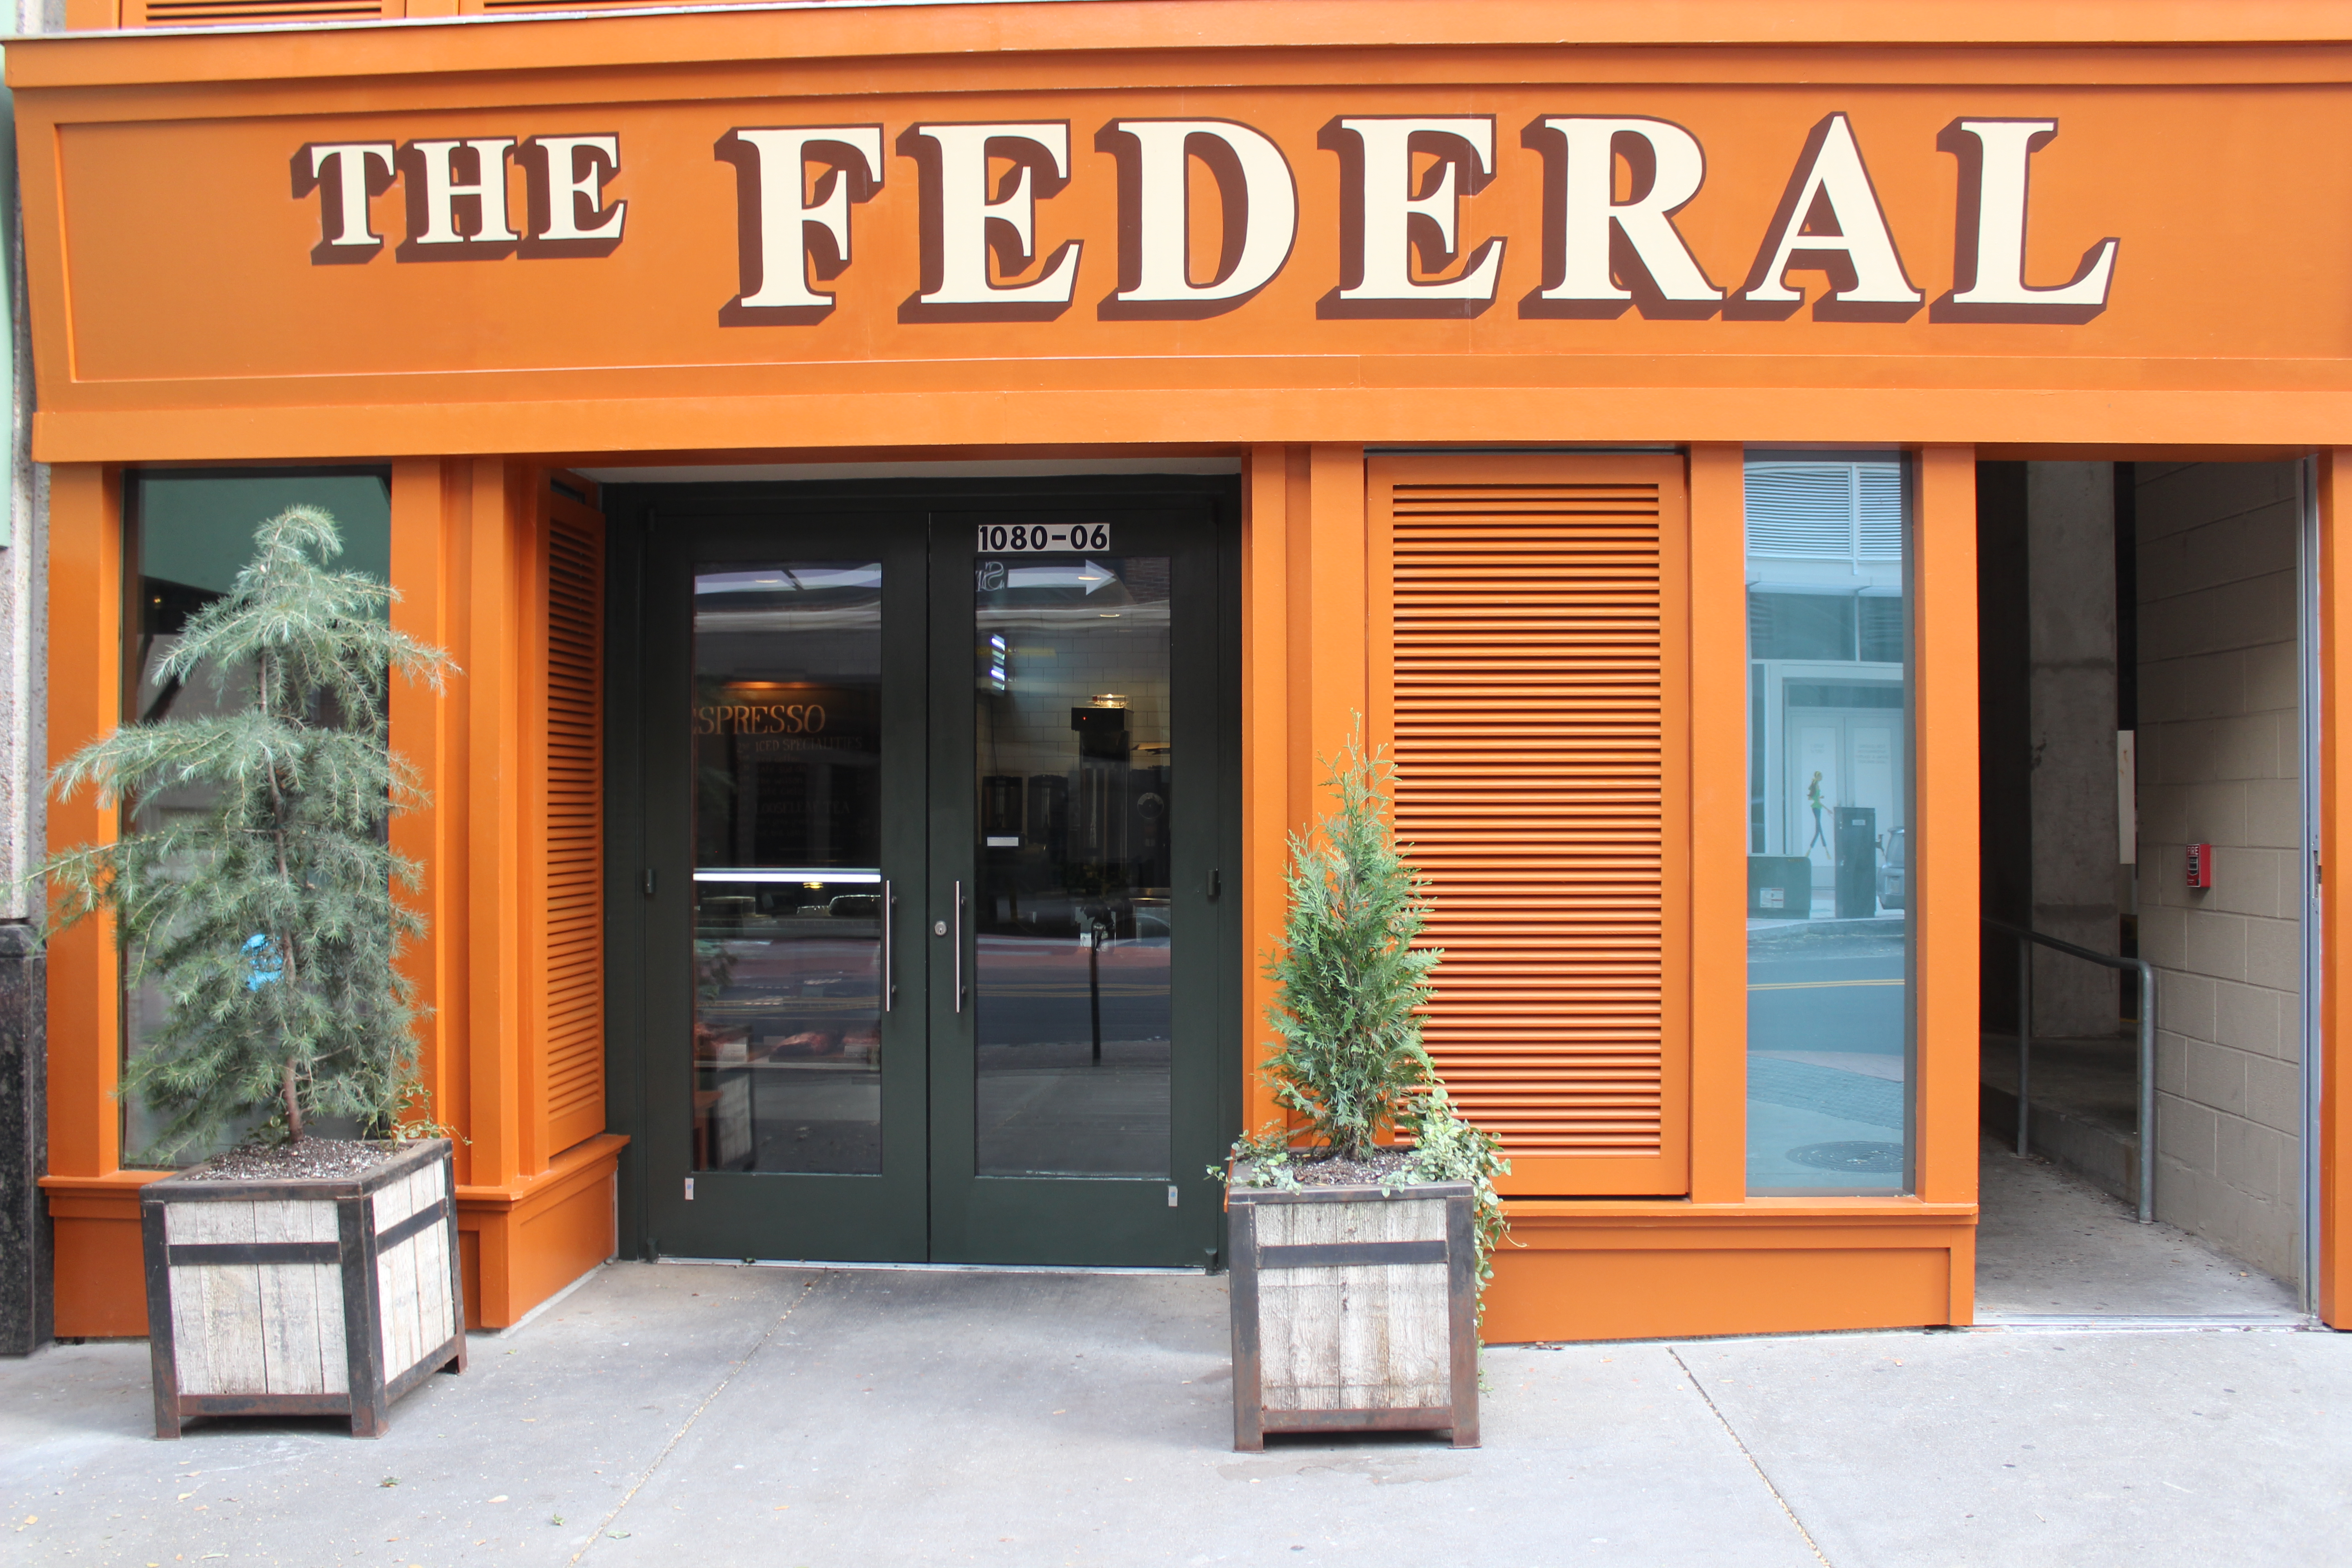 Exterior signage at The Federal.